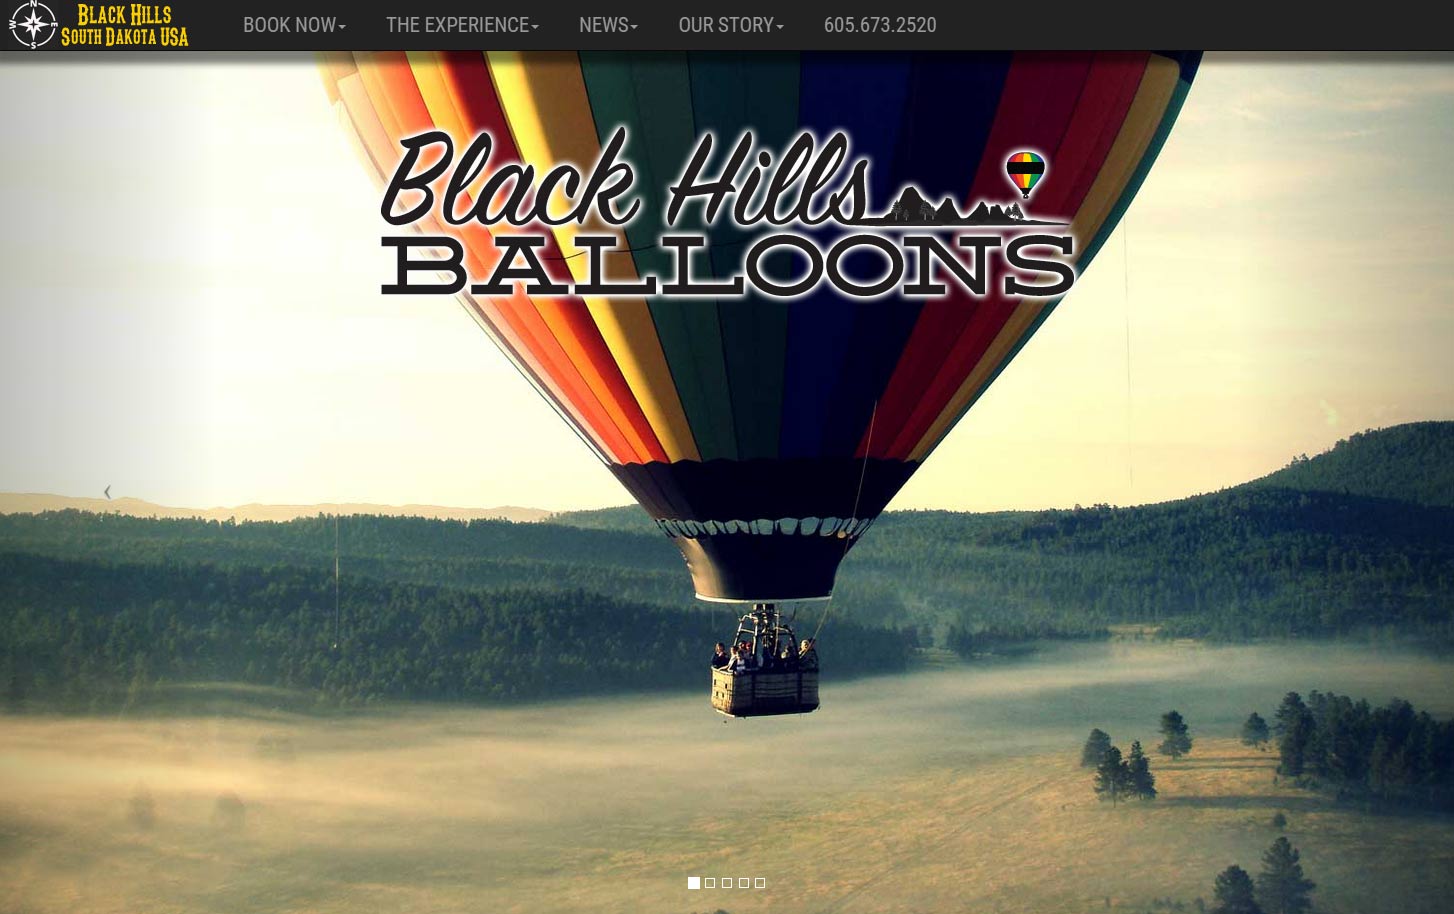 graphical interface, Laptop Repair Orlando, custom reservation system, booking, hot air balloon rides, web development